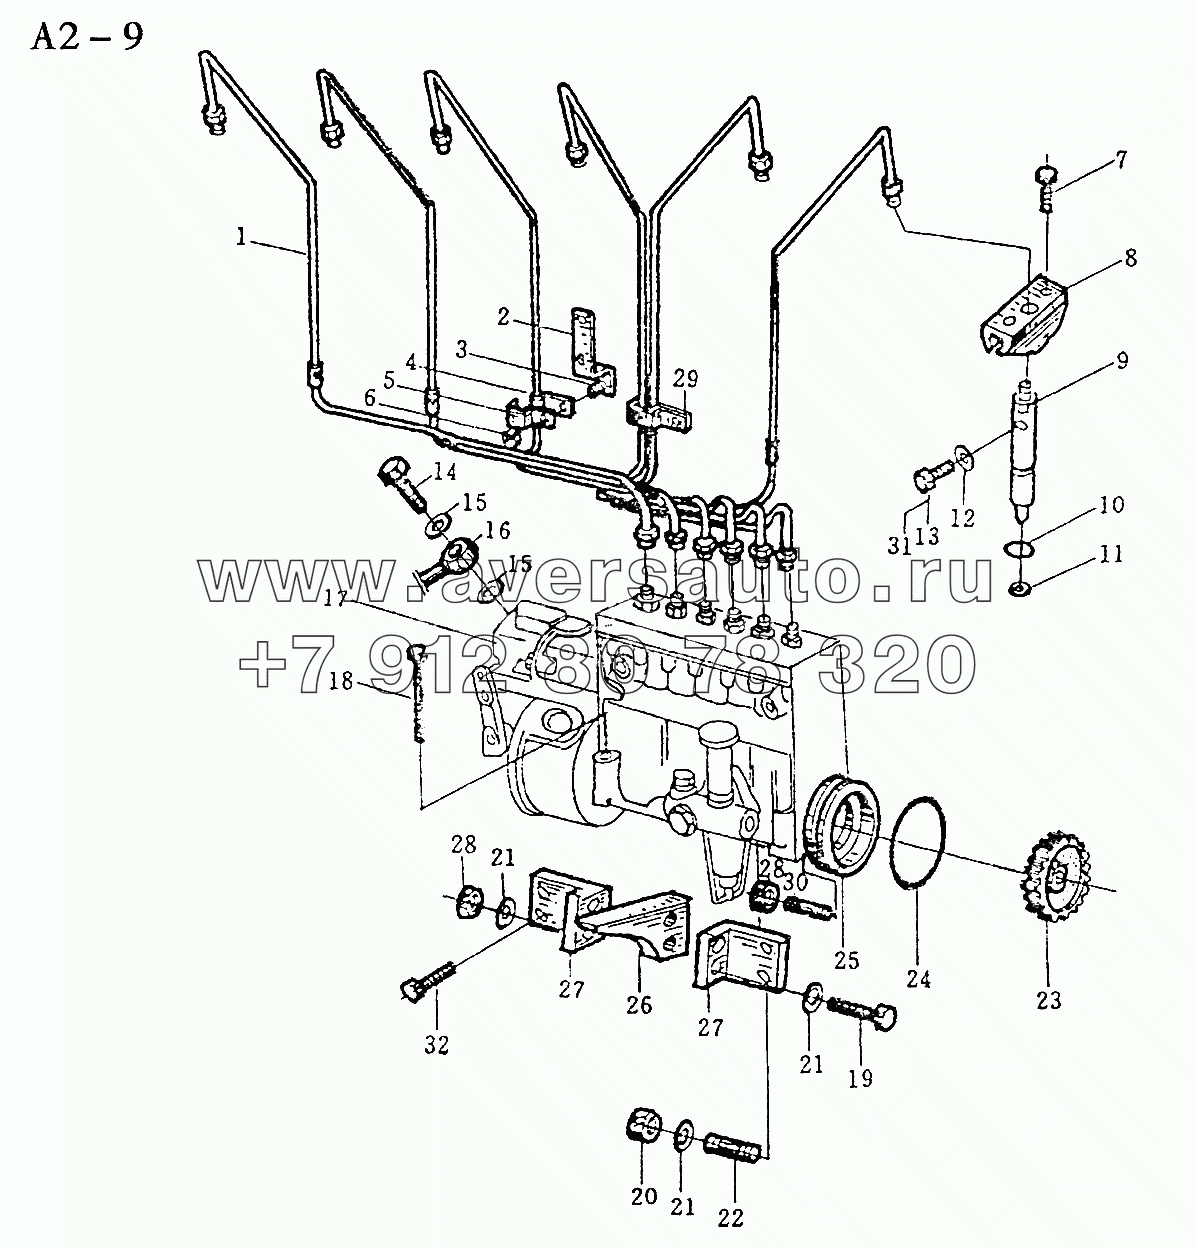 WD618 INJECTION PUMP, INJECTION LINES (A2-9)